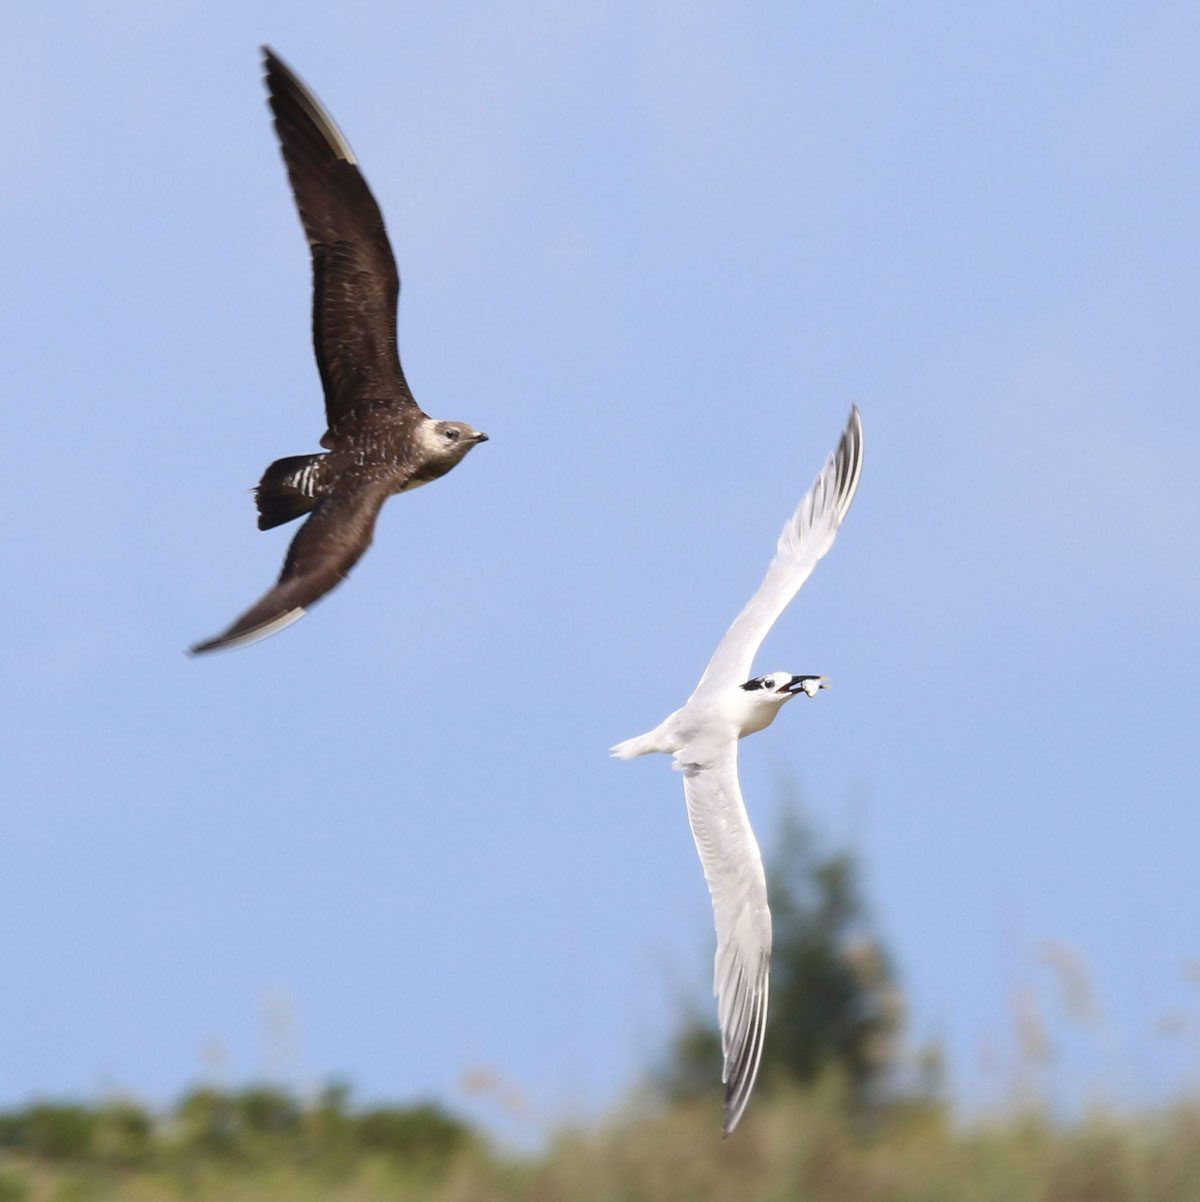 A dark bird (Long-tailed Jaeger) flies after and chases a white bird (Sandwich Tern) to try to steal its food that the white bird carries in its beak. Photo by John Groskopf/Macaulay Library.